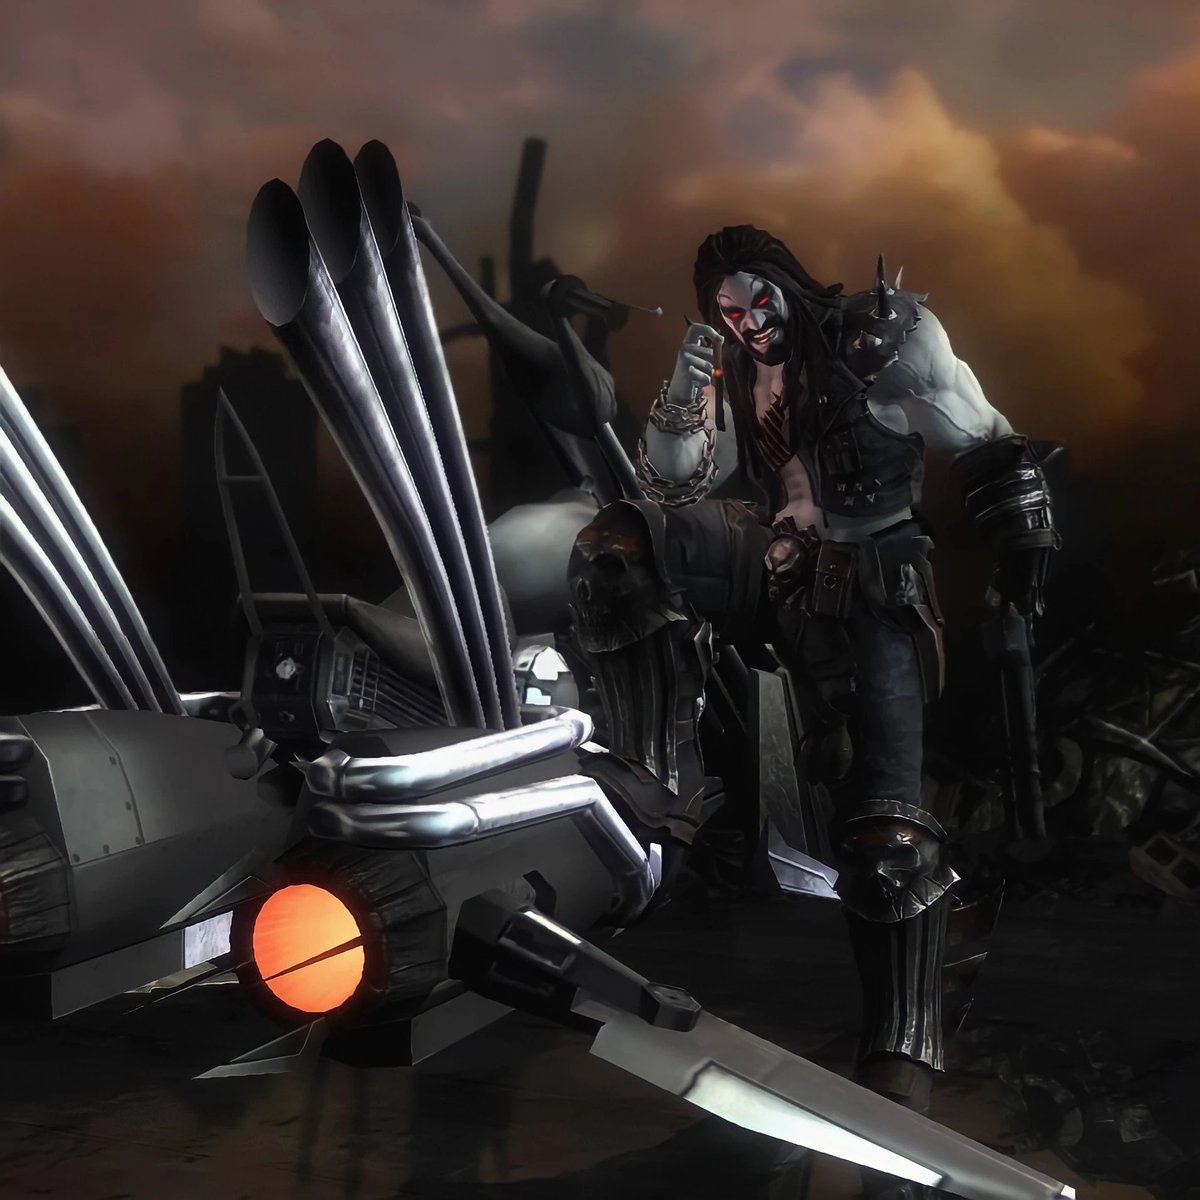 On this day 11 years ago, Lobo was released as a DLC playable character for Injustice: Gods Among Us. Lobo was the first post-launch character to have been released for the game.